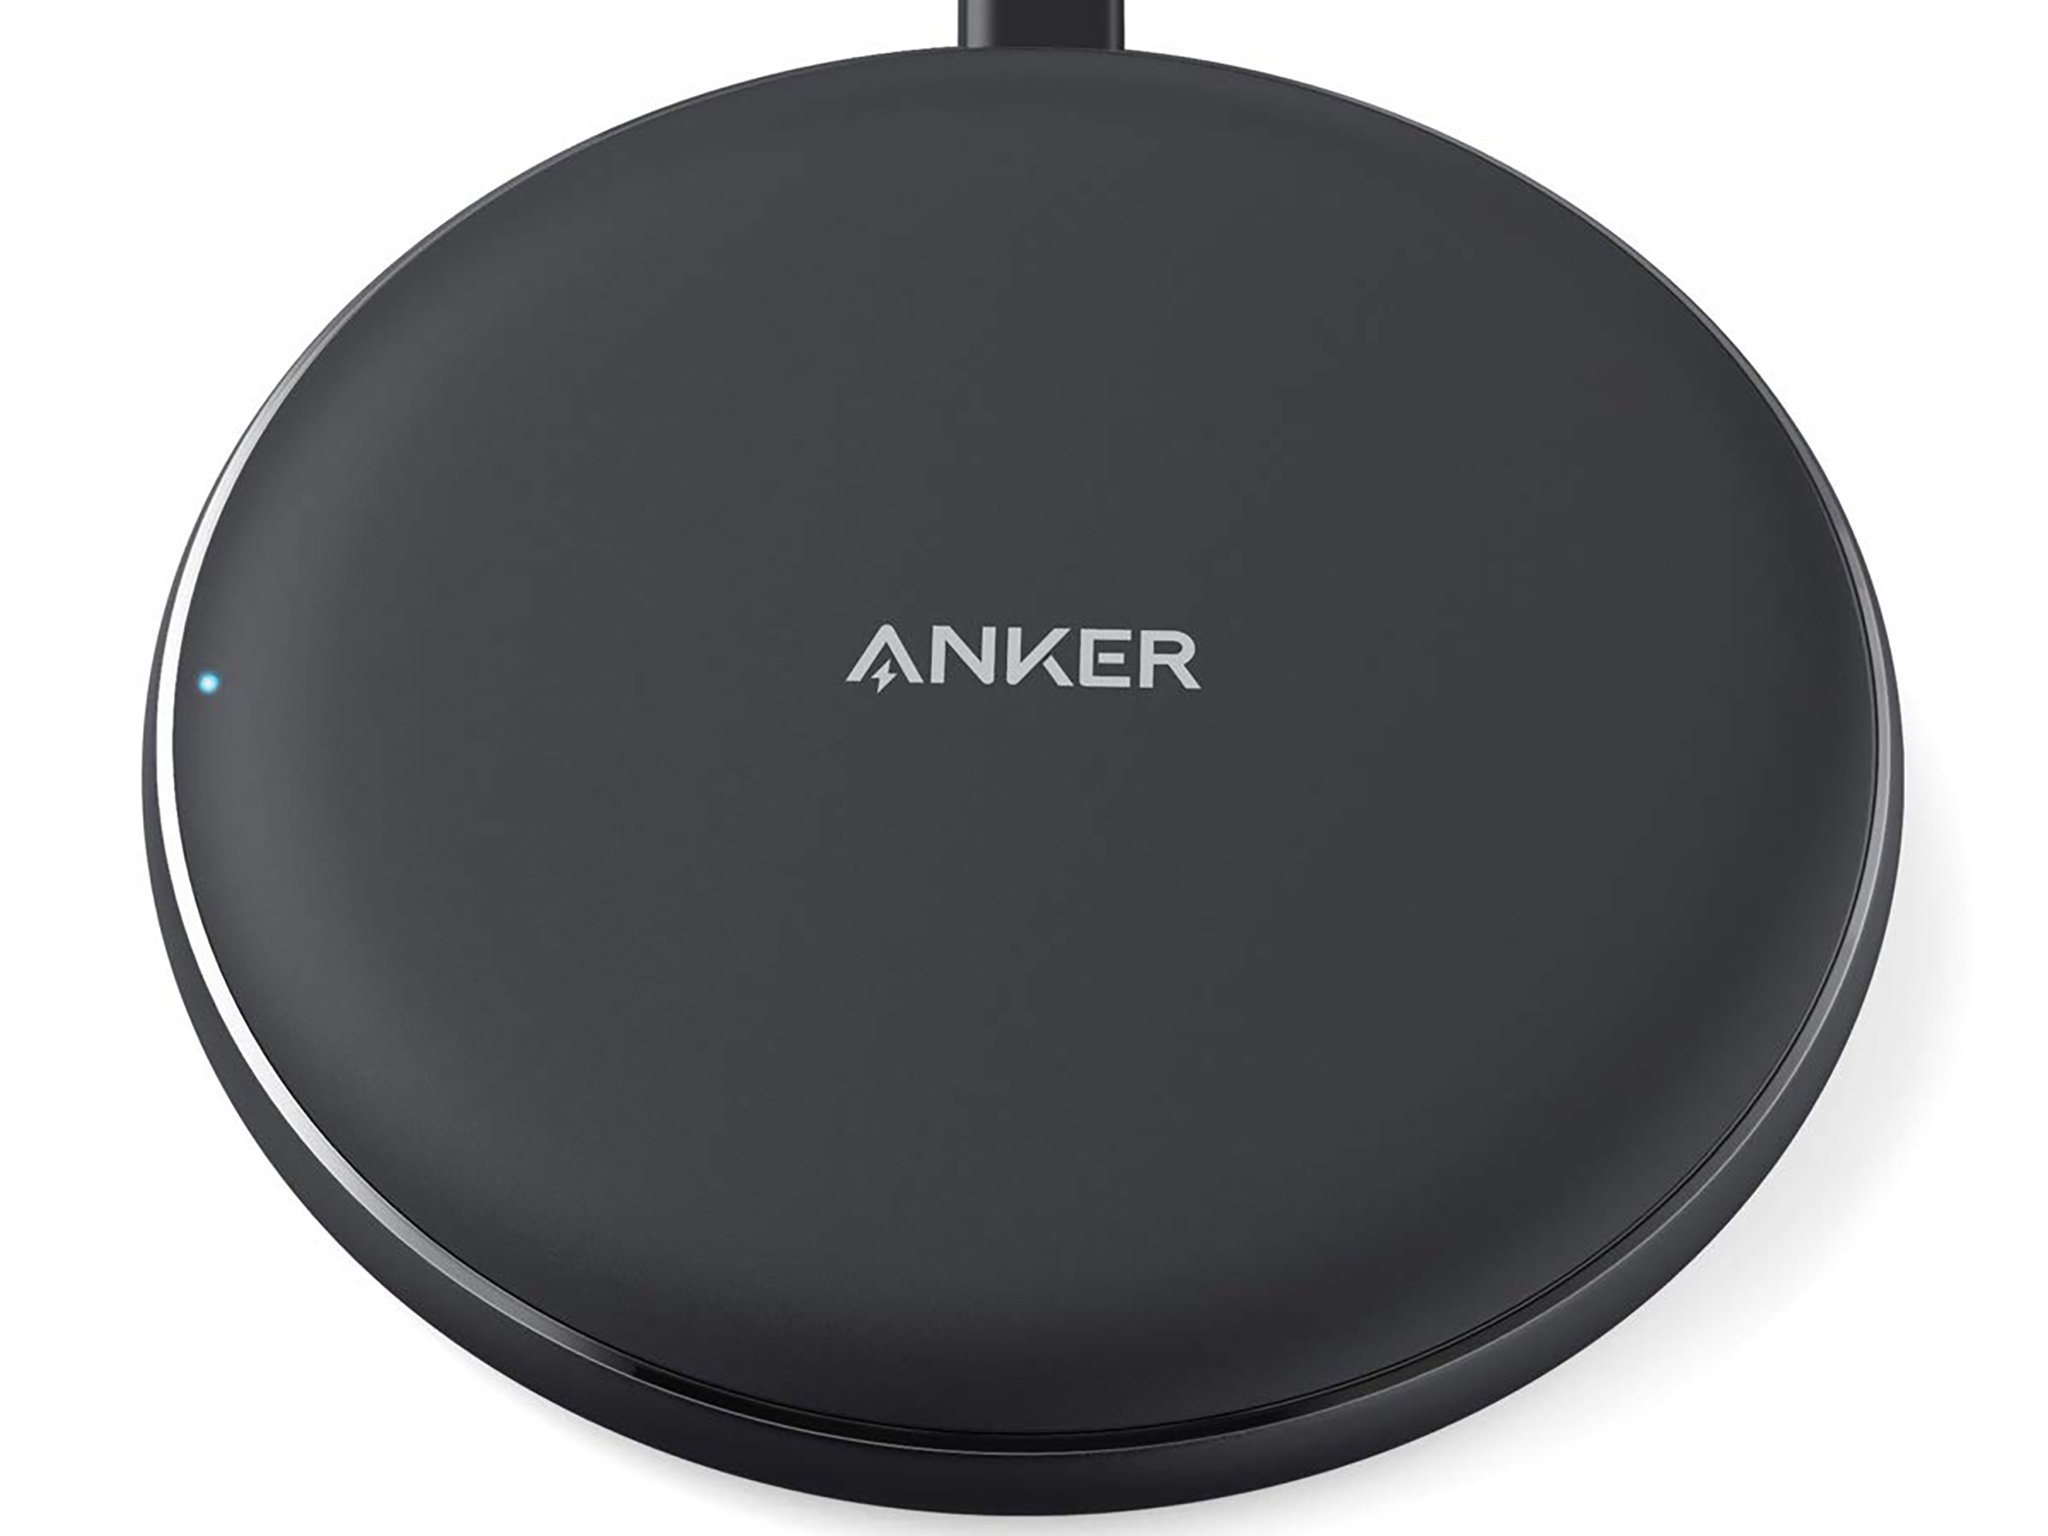 https://www.androidcentral.com/sites/androidcentral.com/files/article_images/2020/01/anker-powerwave-pad-wireless-charger.jpg?itok=10BThu25